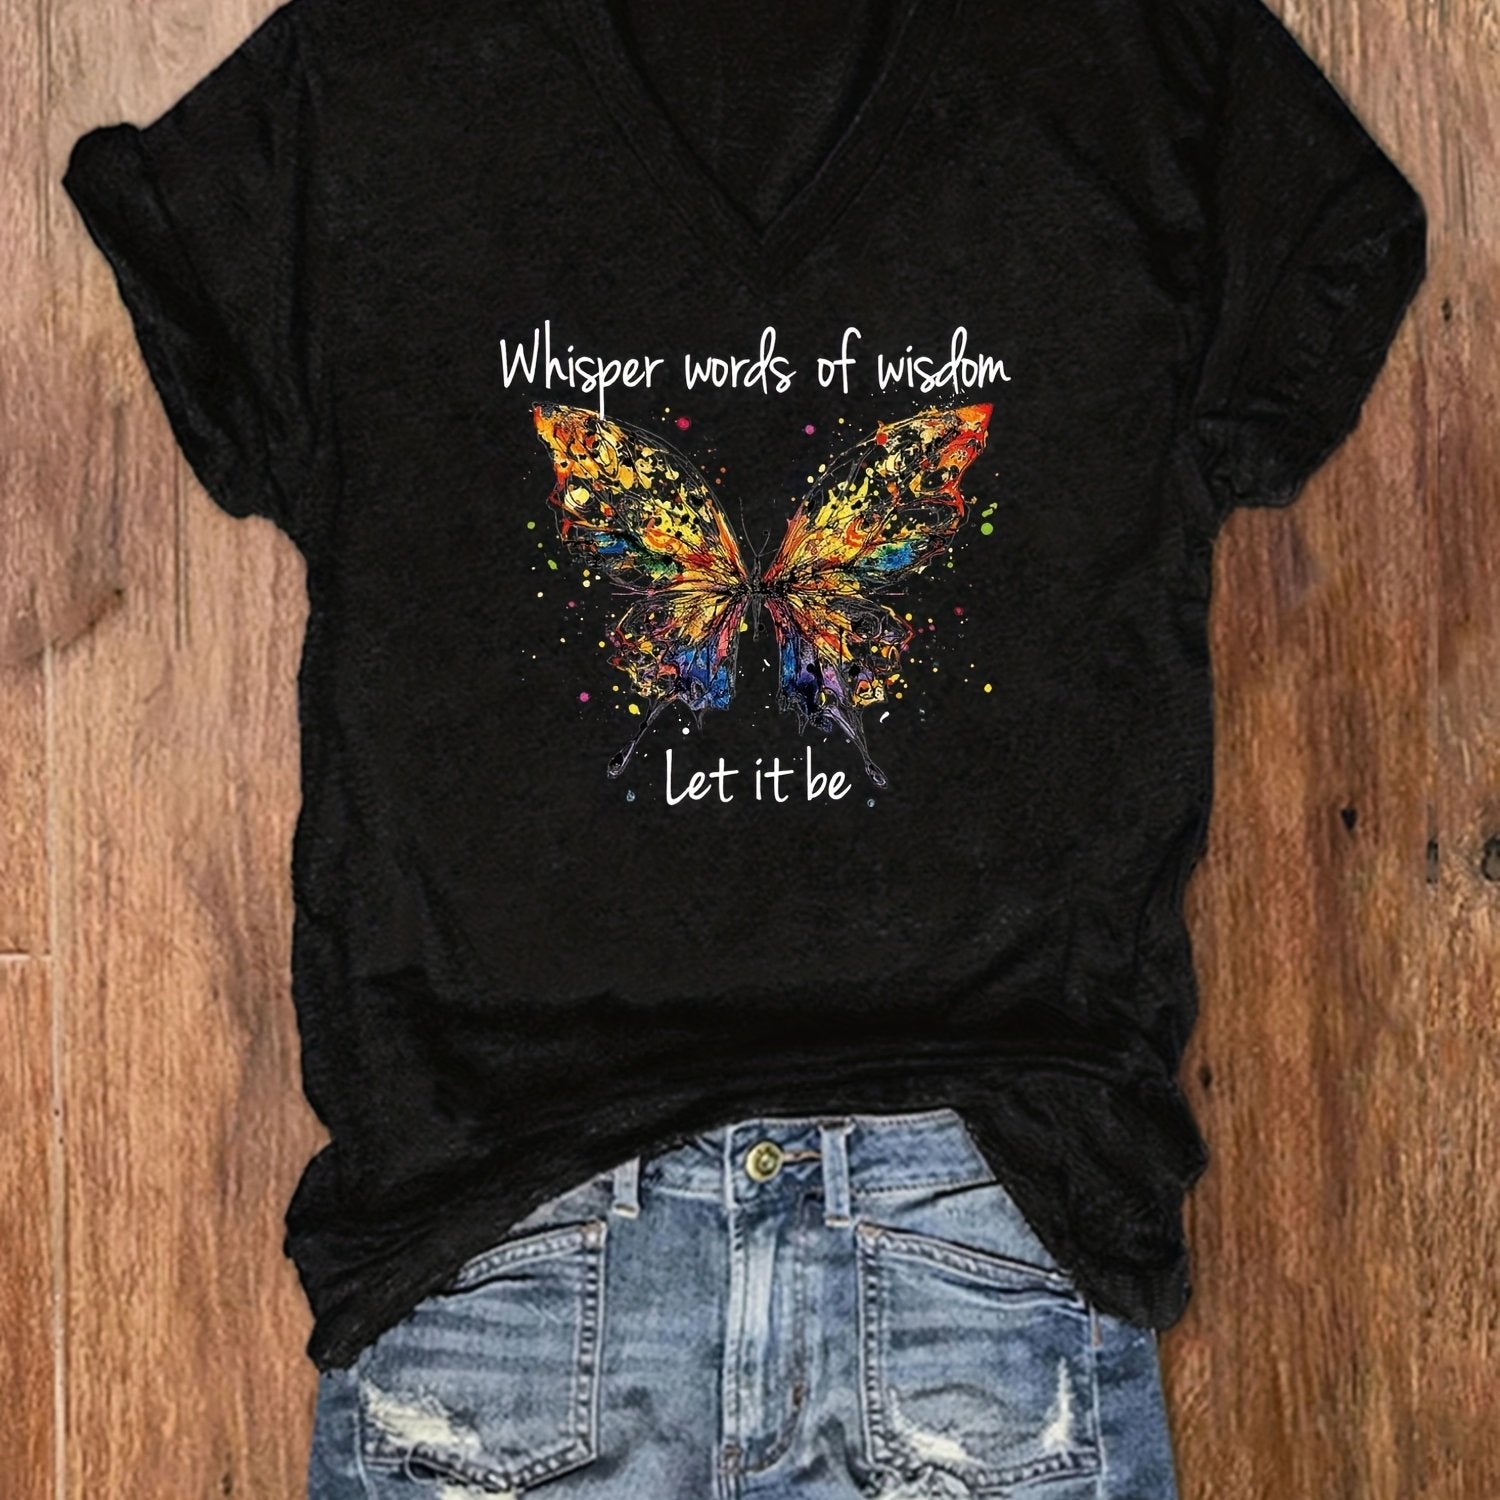 「binfenxie」Letter & Butterfly Print T-Shirt, V Neck Short Sleeve T-Shirt, Casual Every Day Tops, Women's Clothing